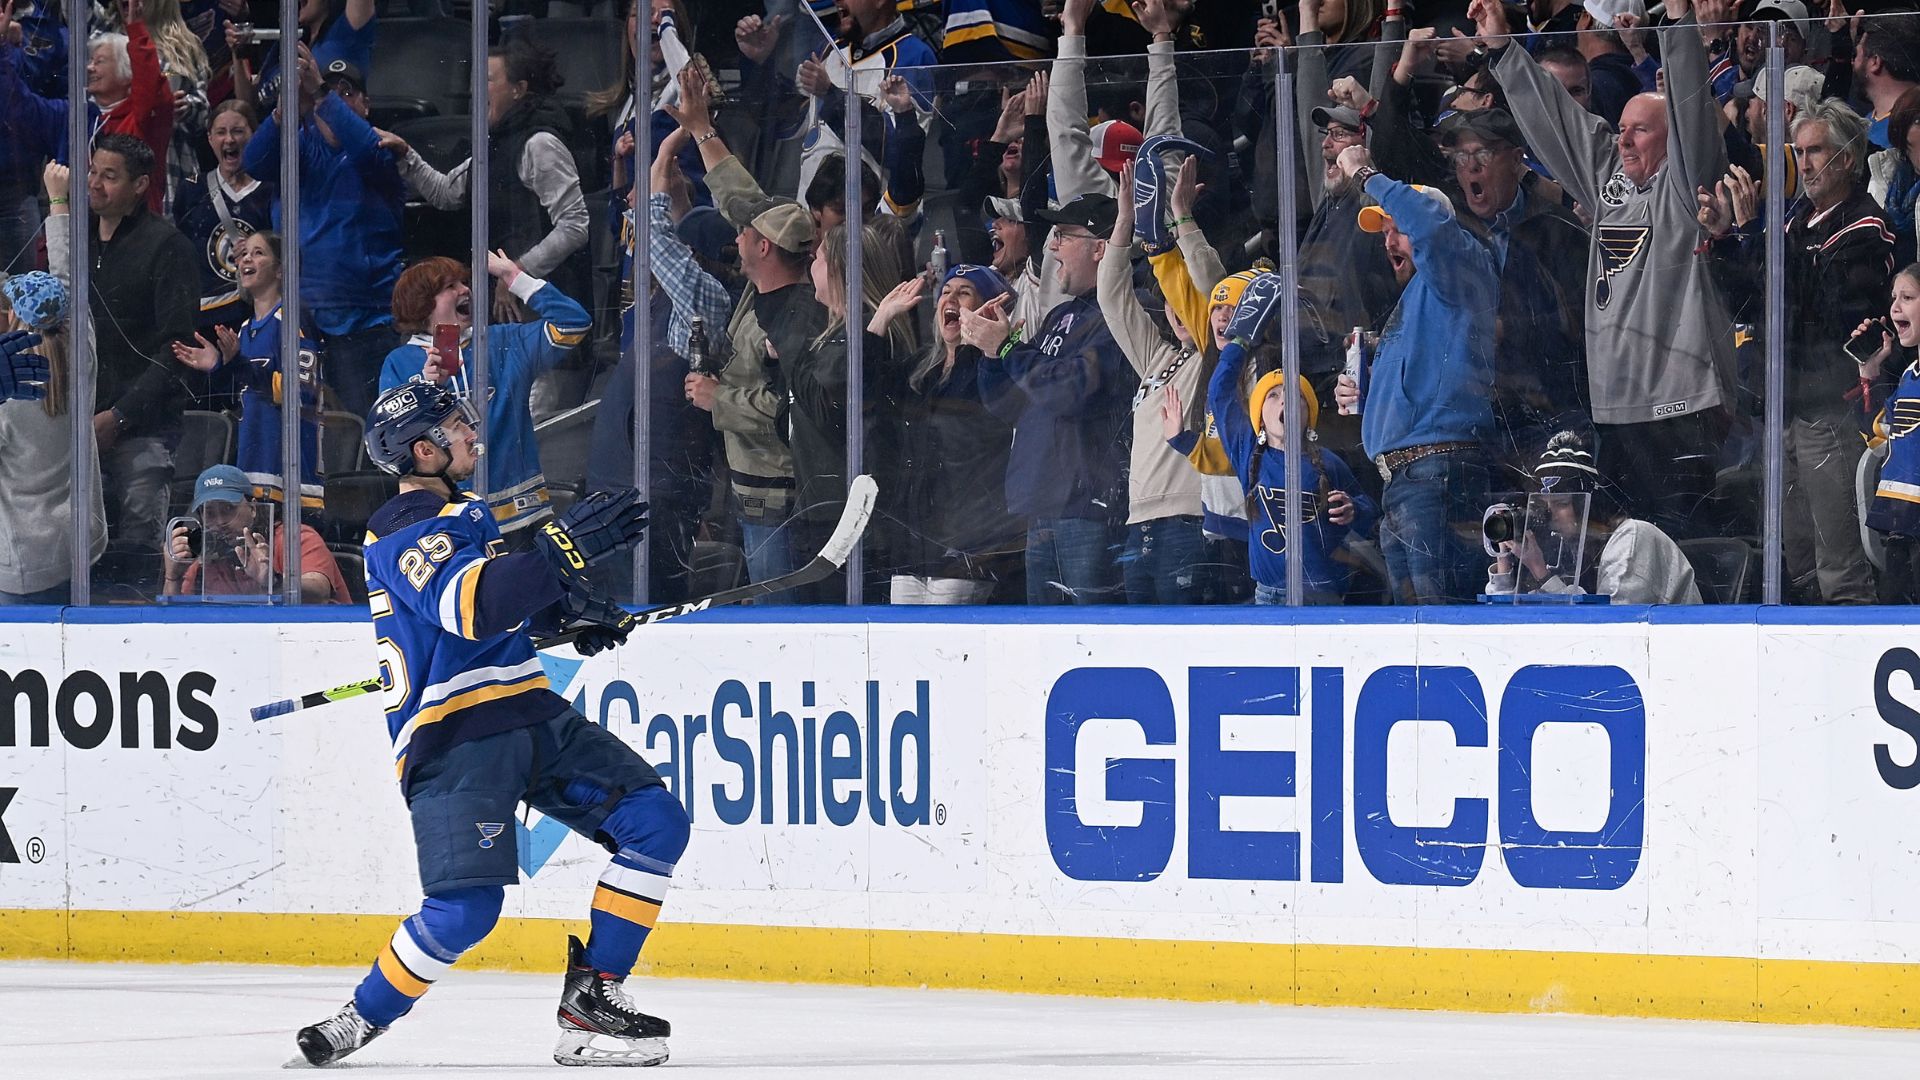 Jordan Kyrou throws a puck into the stands at a St. Louis Blues home game.